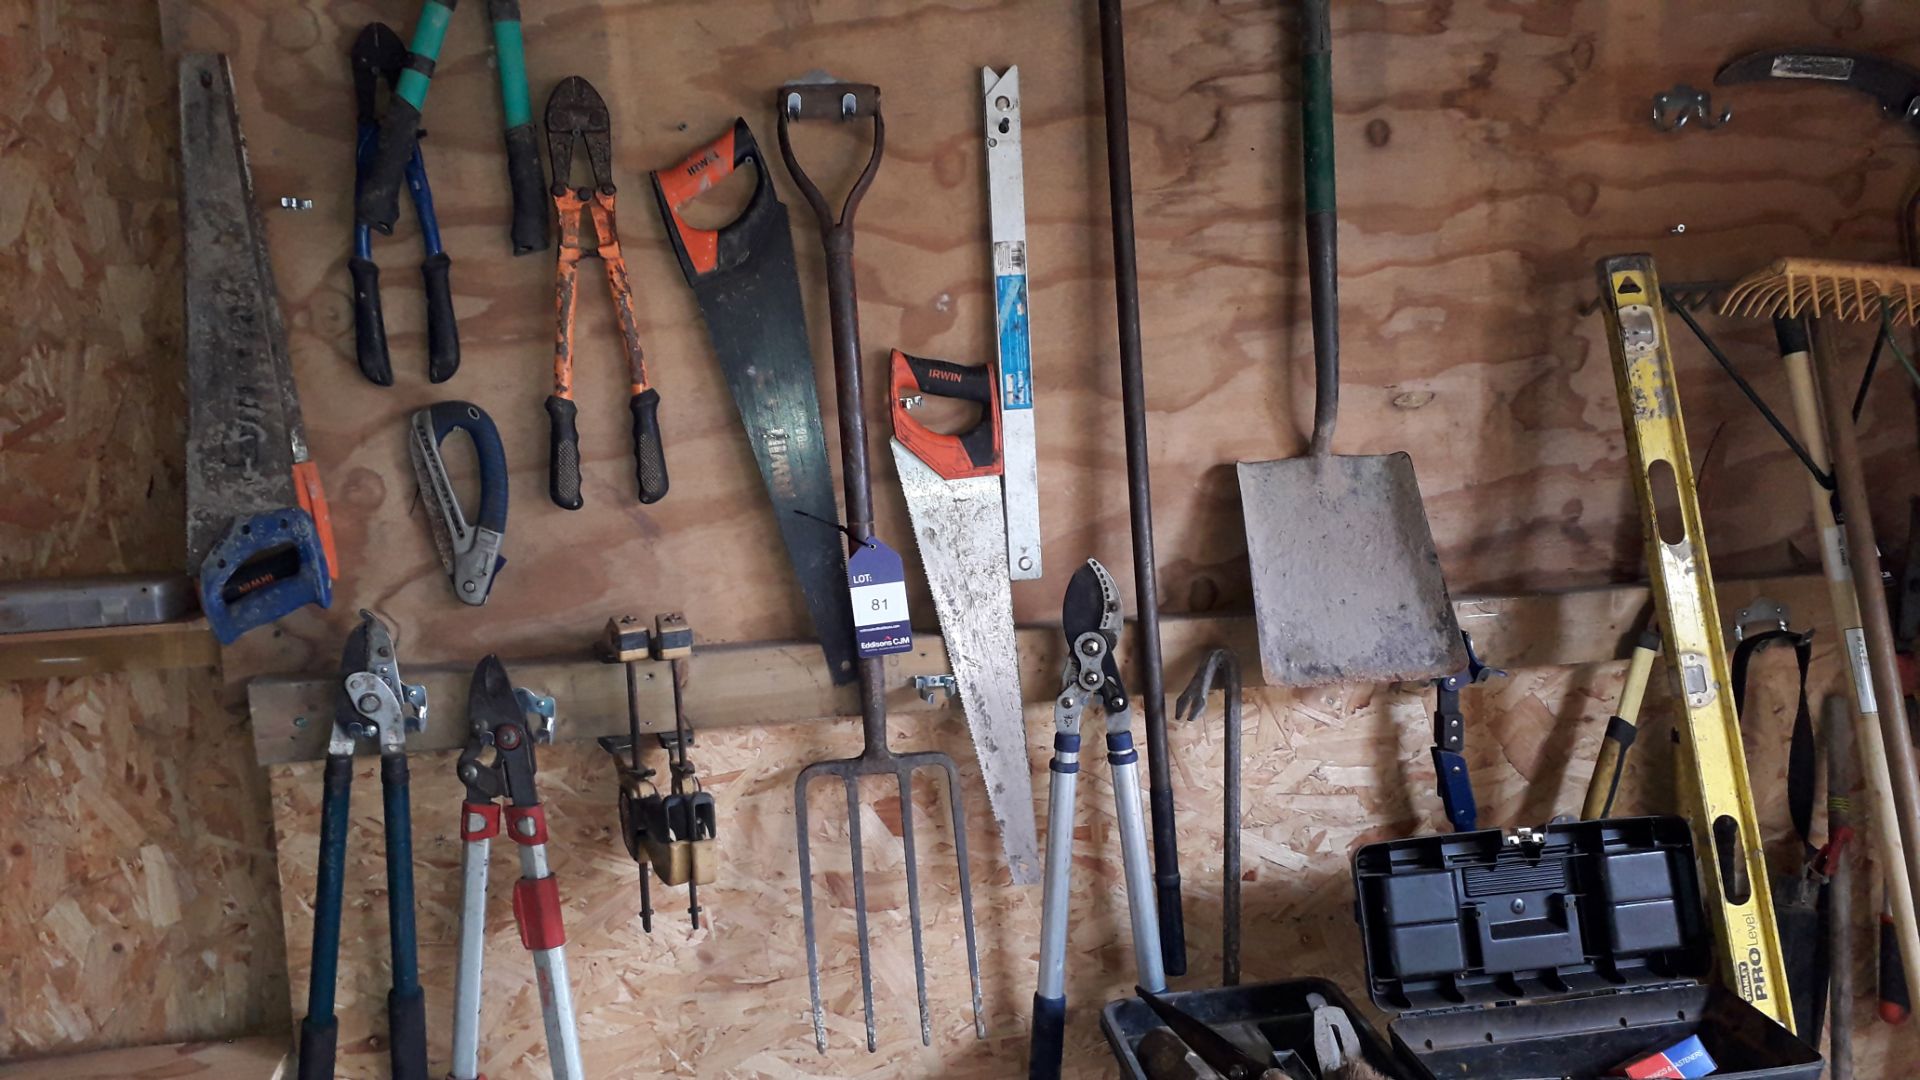 Quantity of Garden Tools to include Shovels, Racks, Shears, Hoes, Folding Workbench - Image 2 of 3